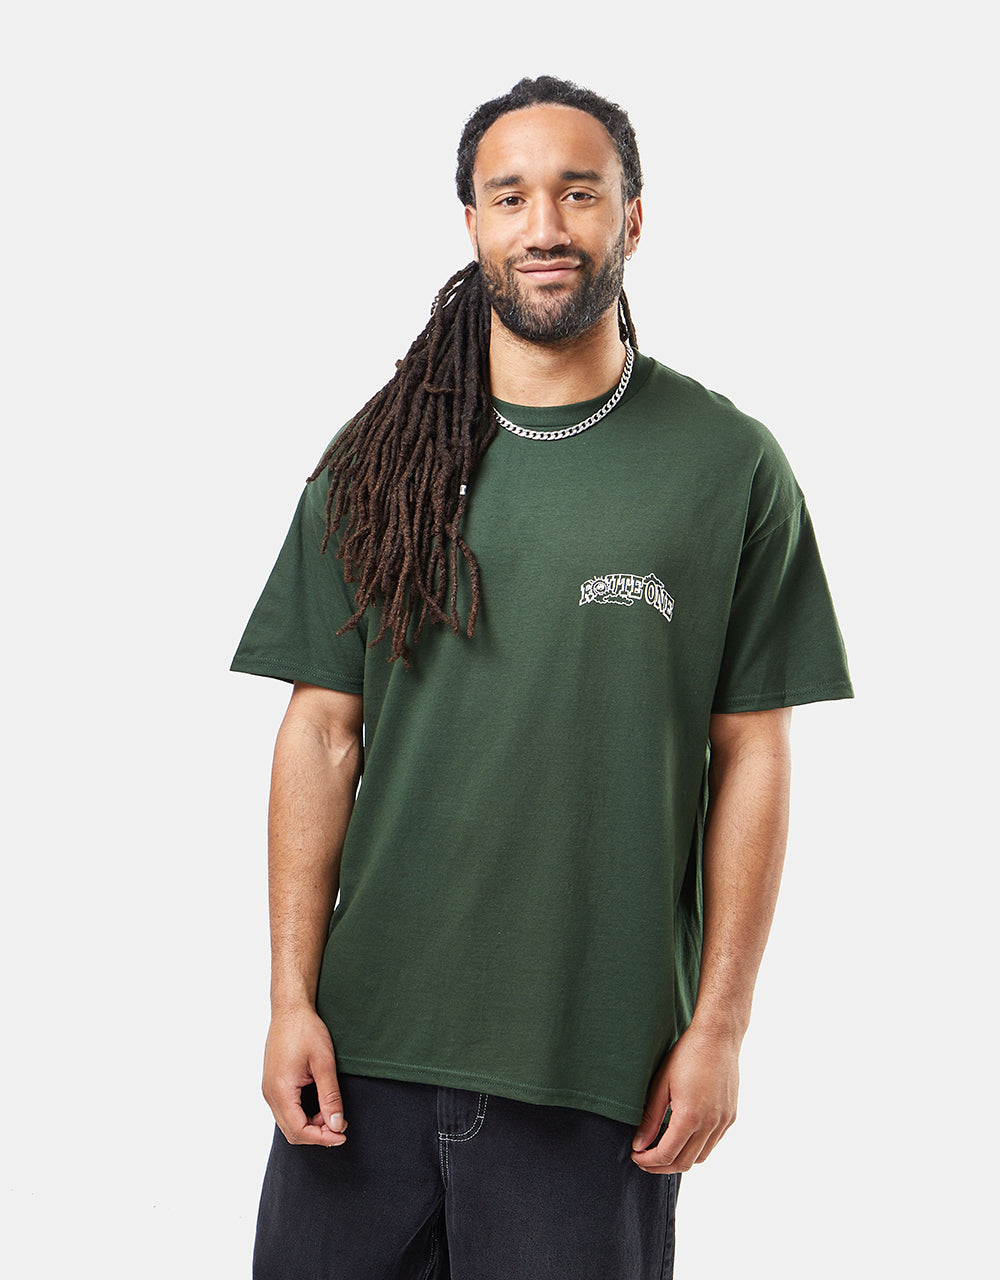 Route One Construction T-Shirt - Forest Green